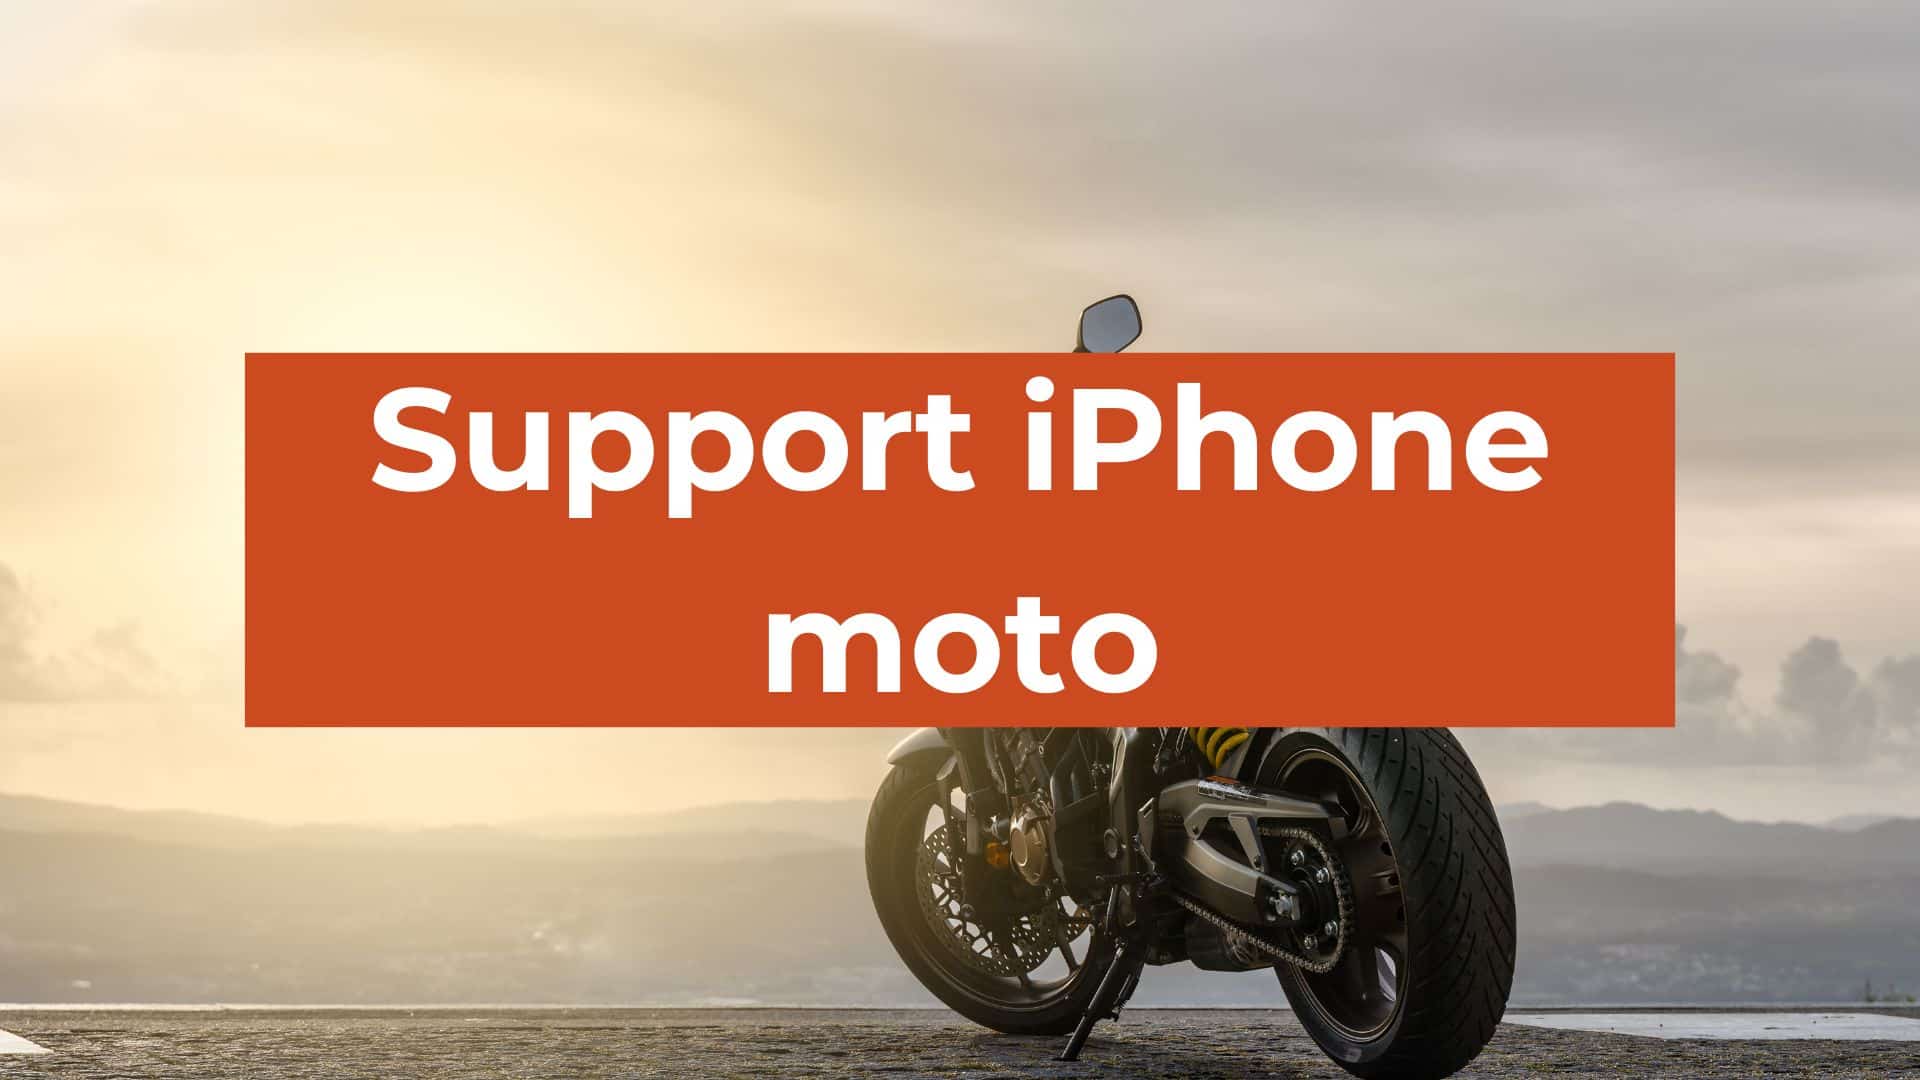 support iphone moto